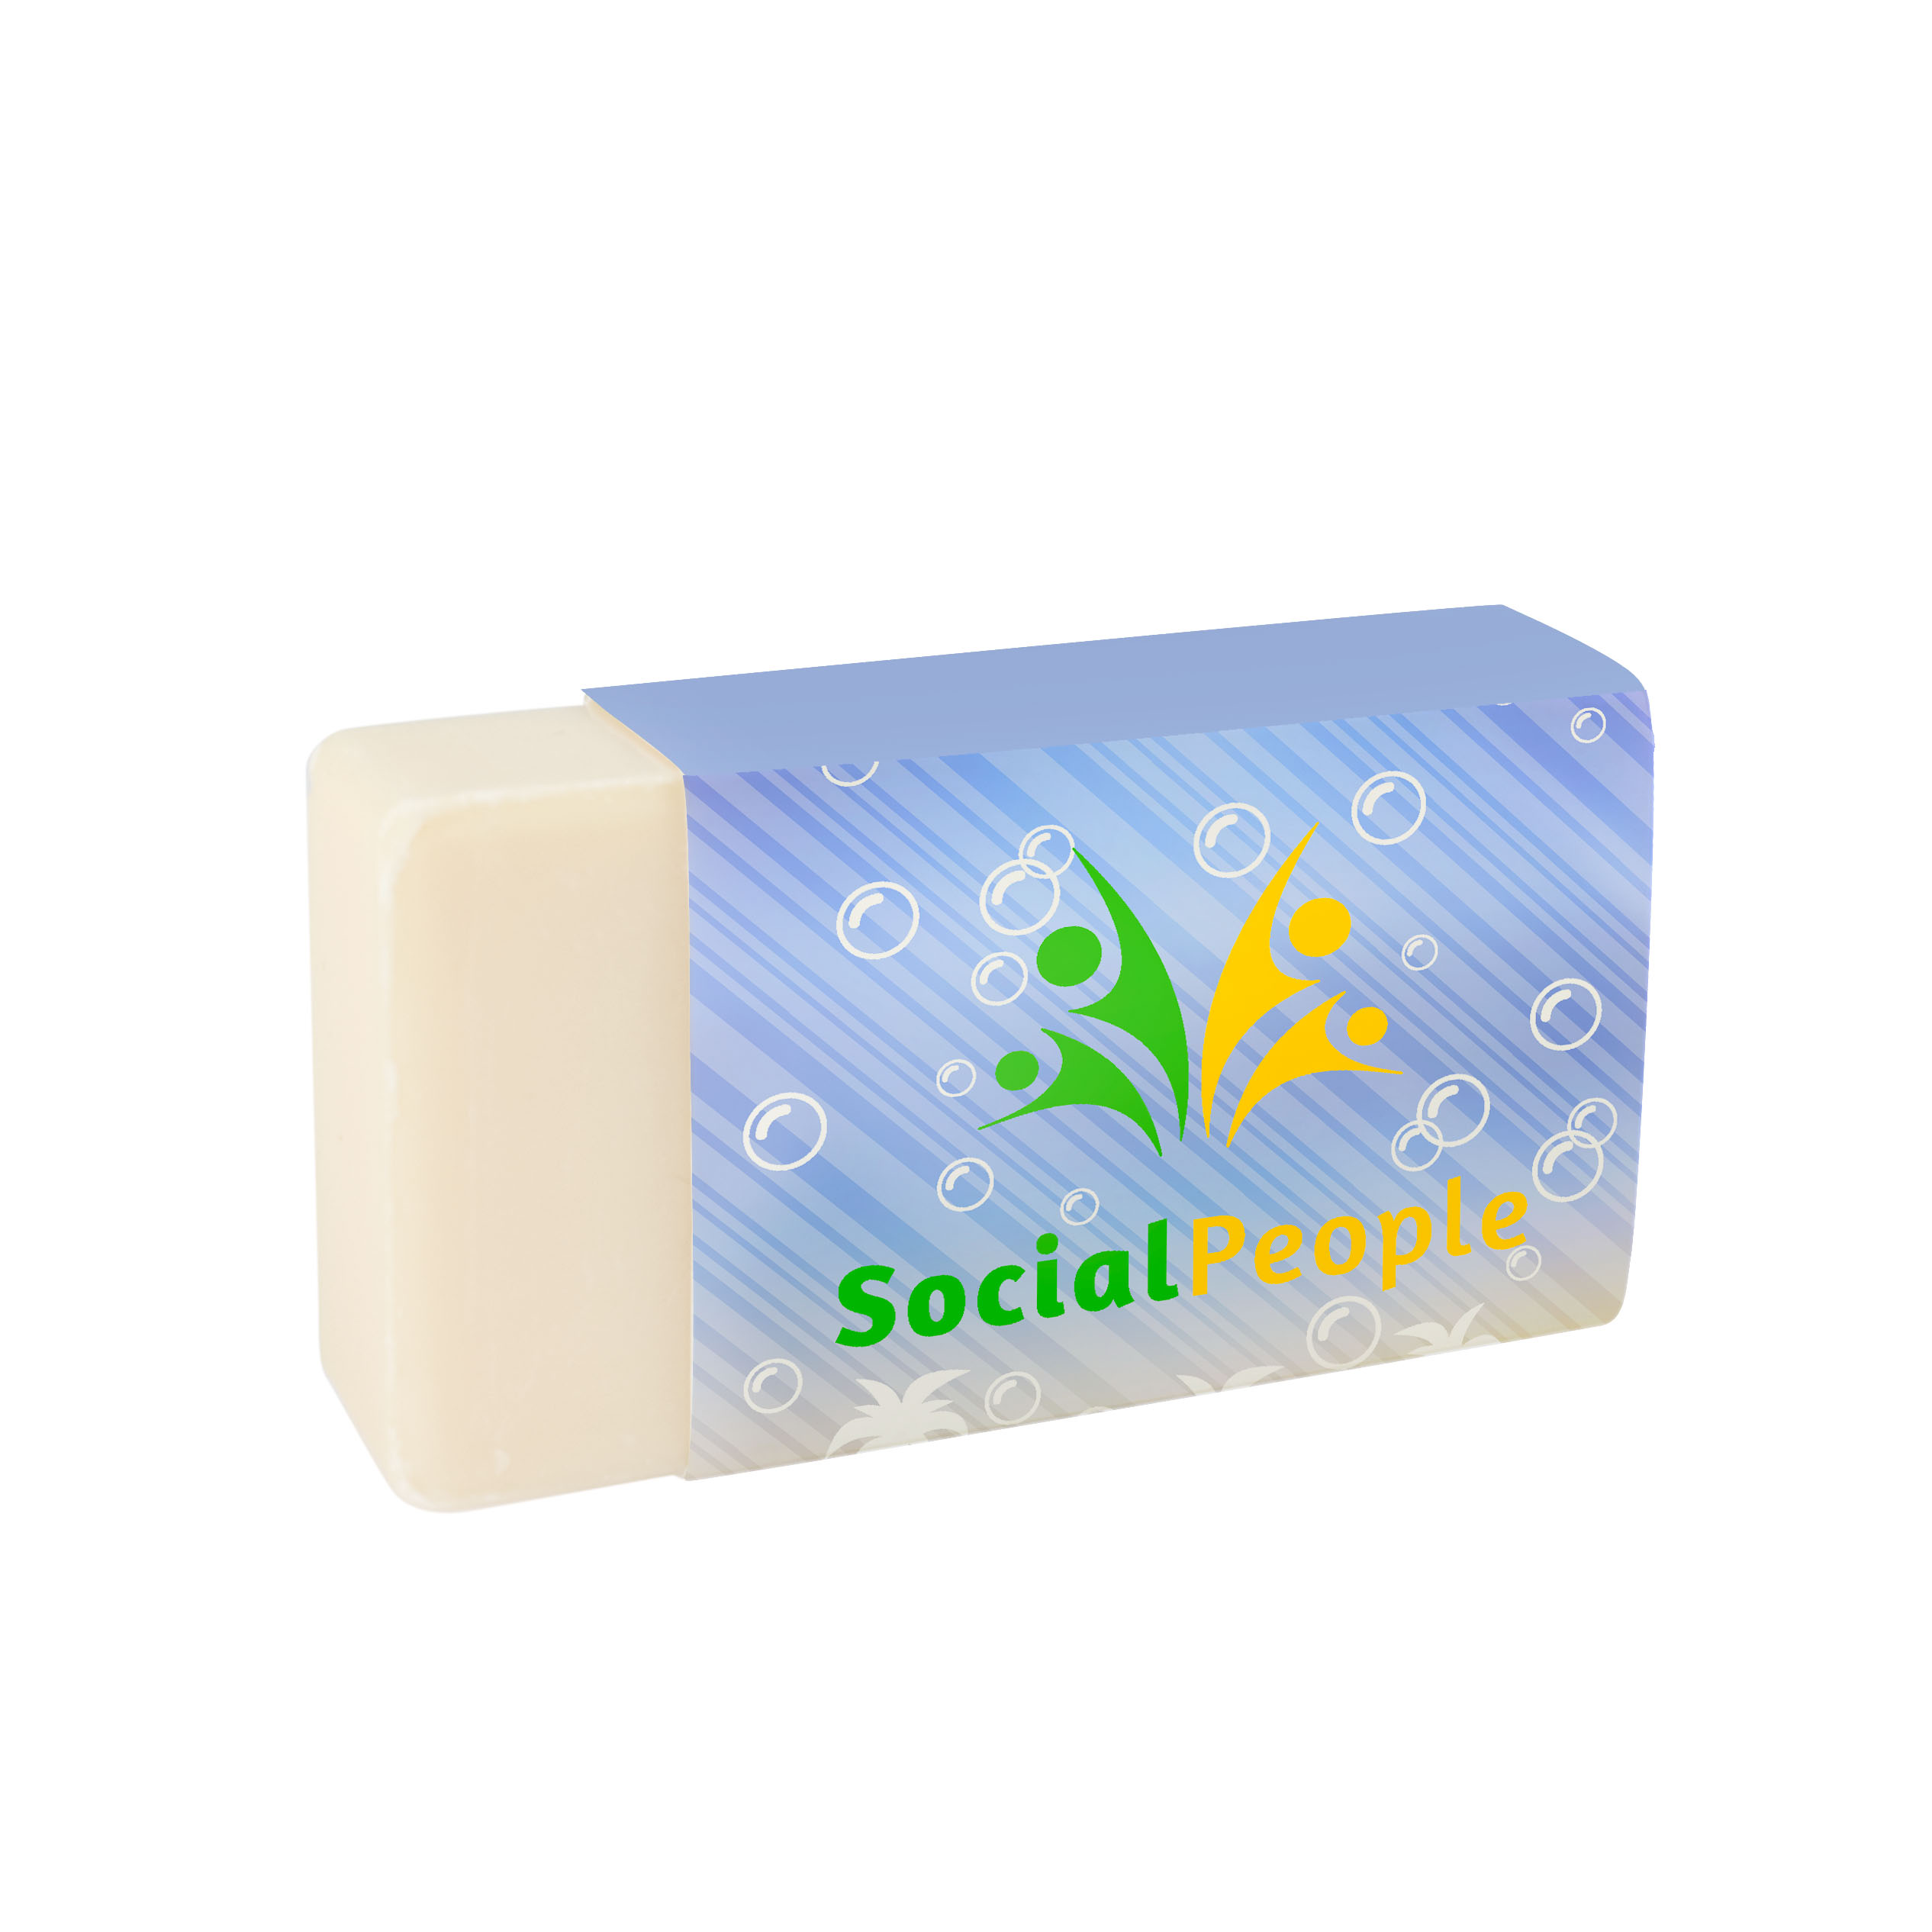 Soap made from Natural Ingredients from the Netherlands - Houghton-le-Spring